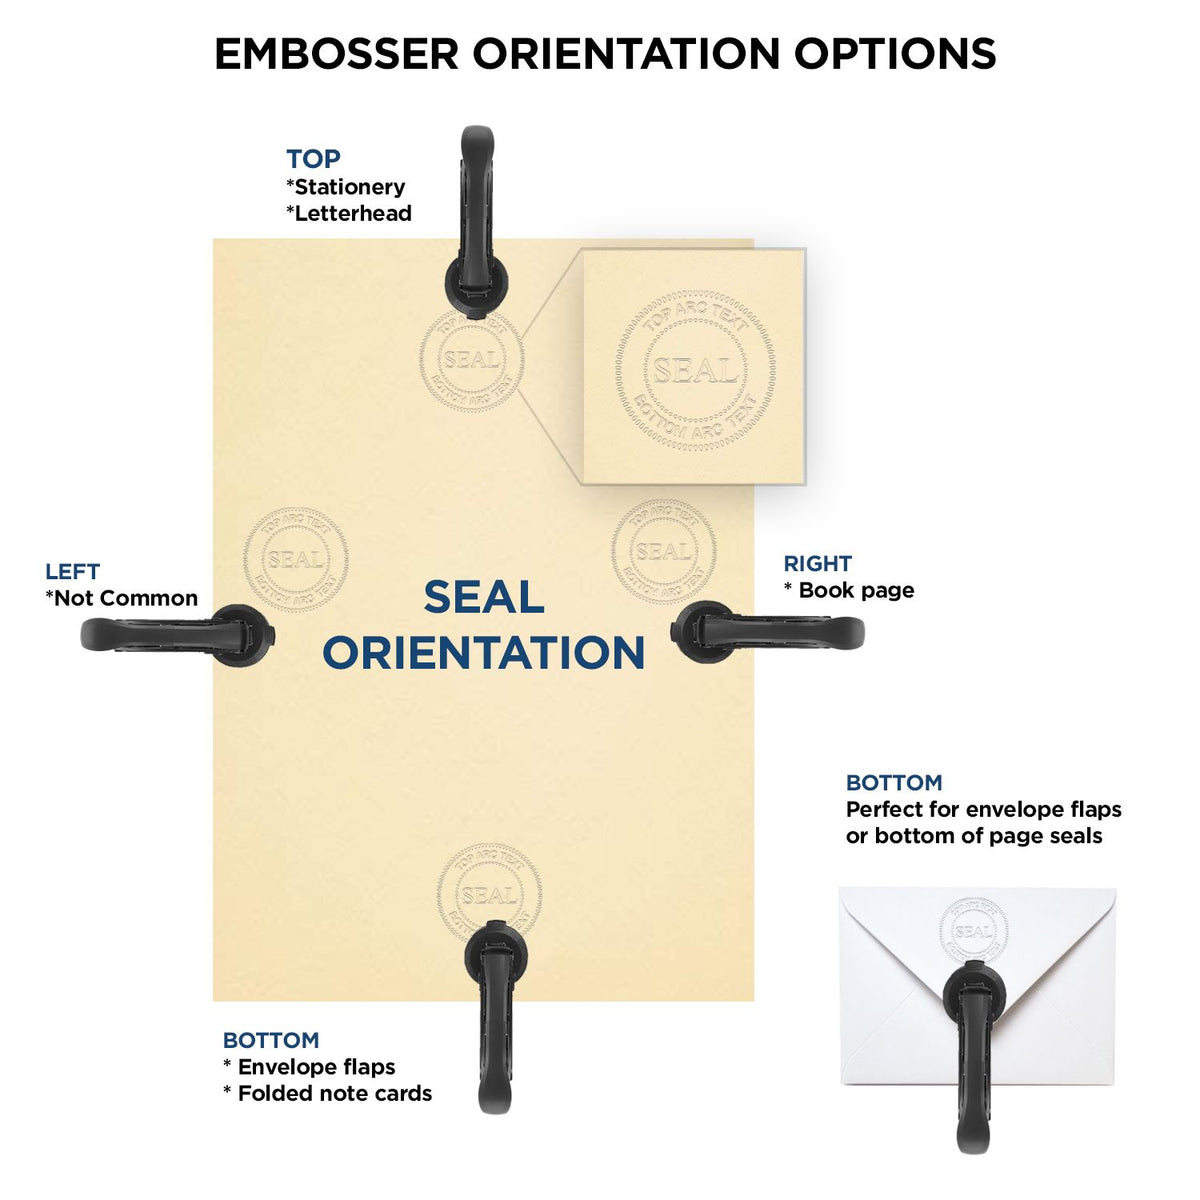 An infographic for the Long Reach Mississippi PE Seal showing embosser orientation, this is showing examples of a top, bottom, right and left insert.